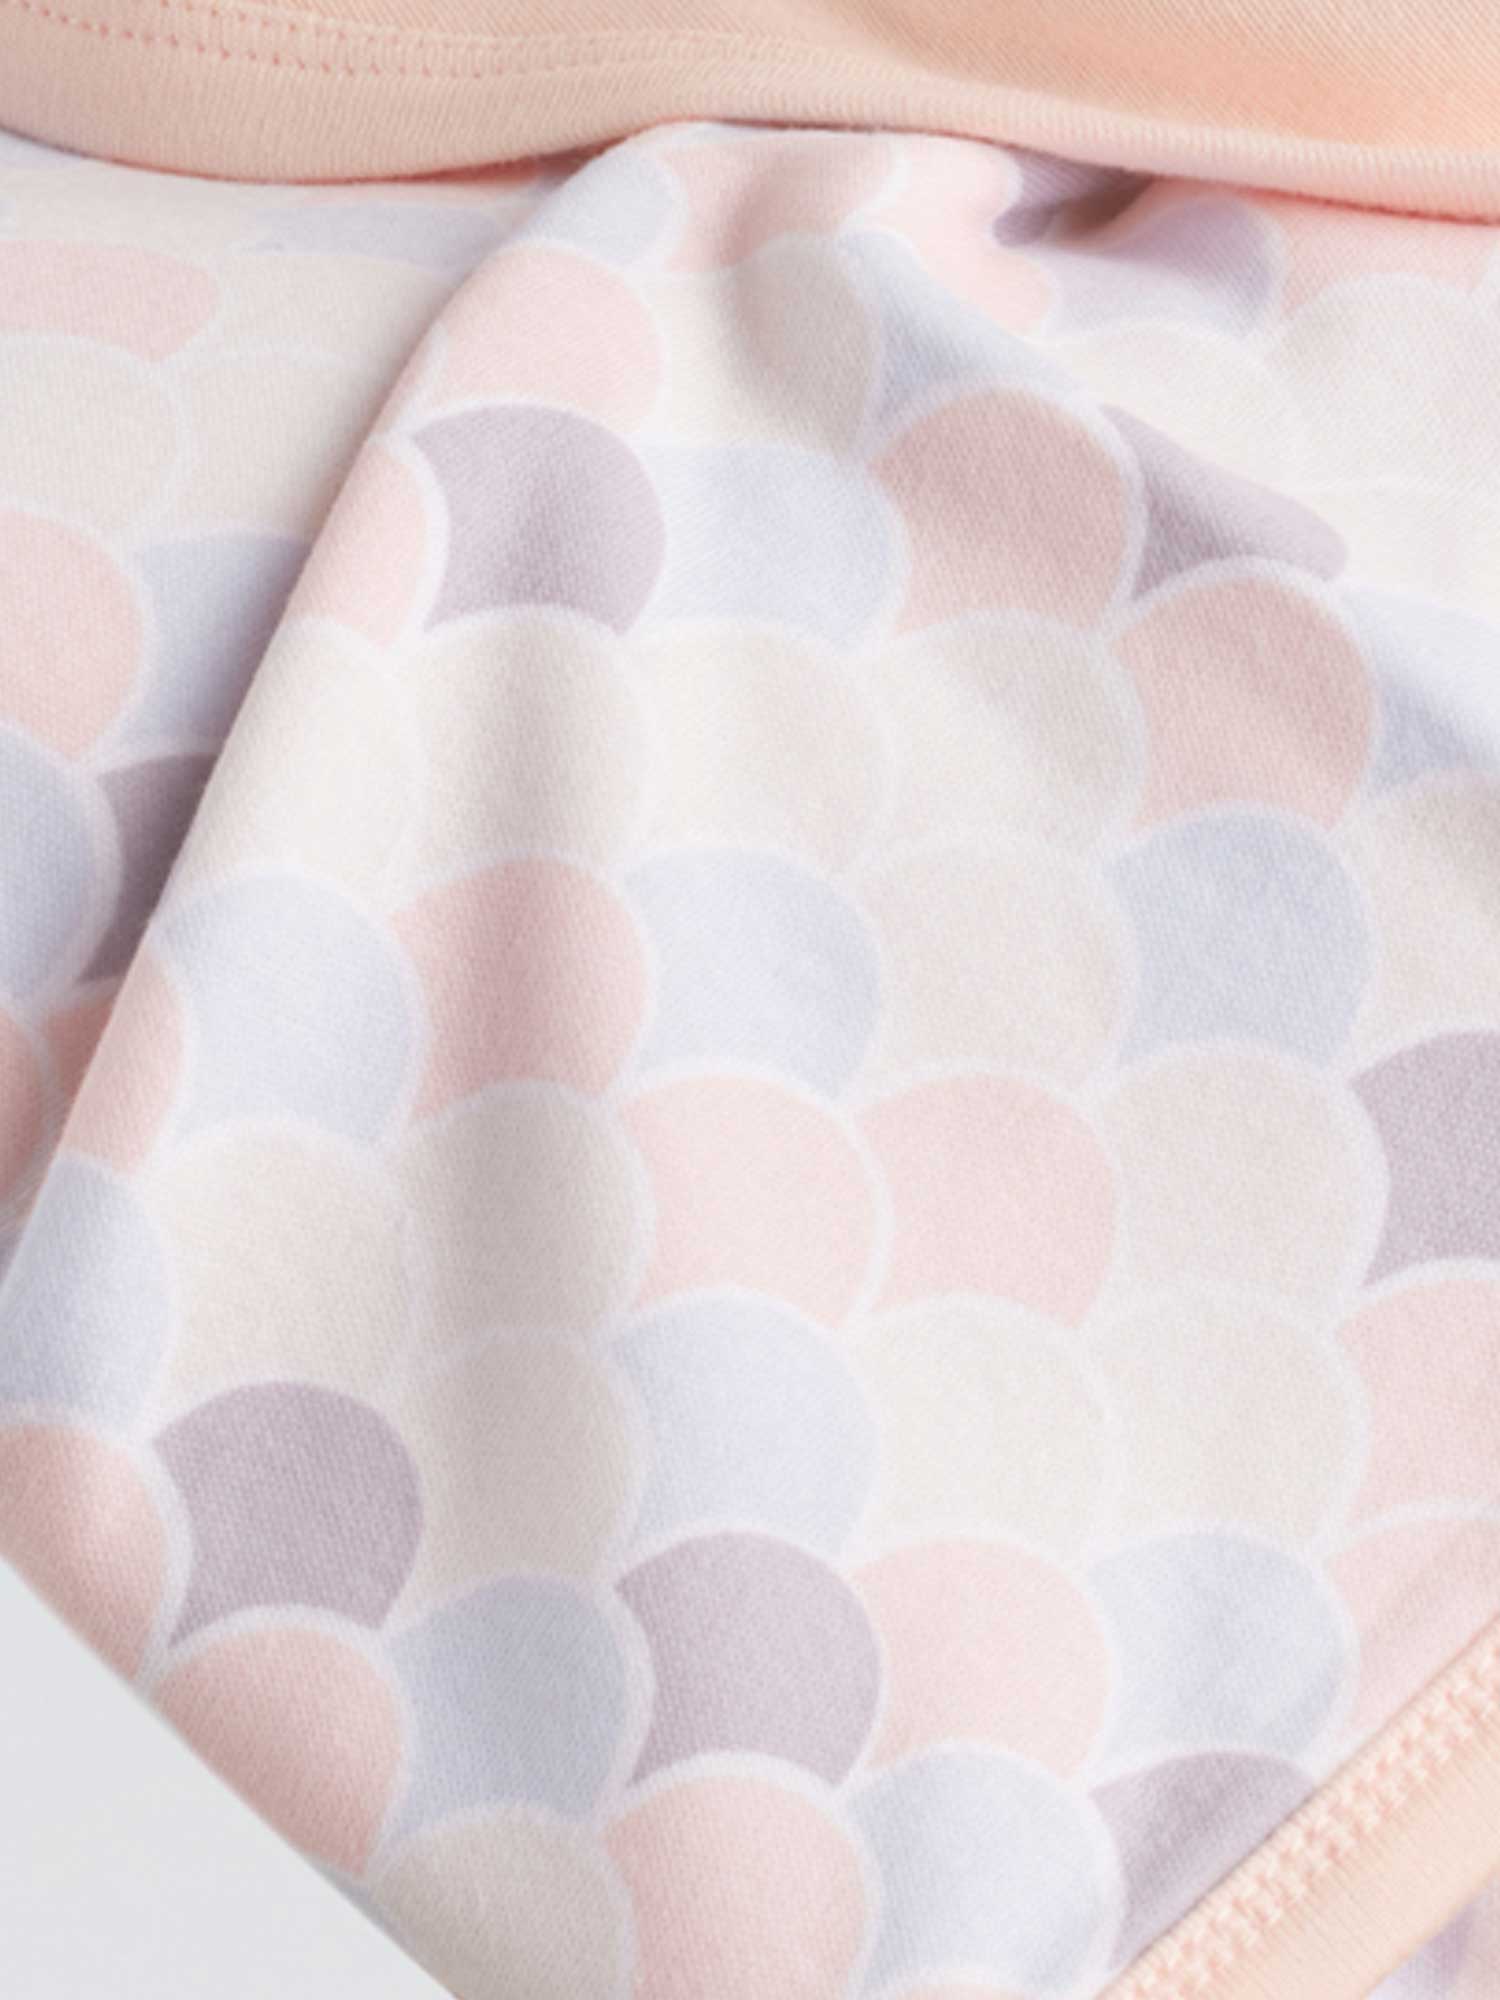 The special fish scales print will make the little one feel like a fish after bath.